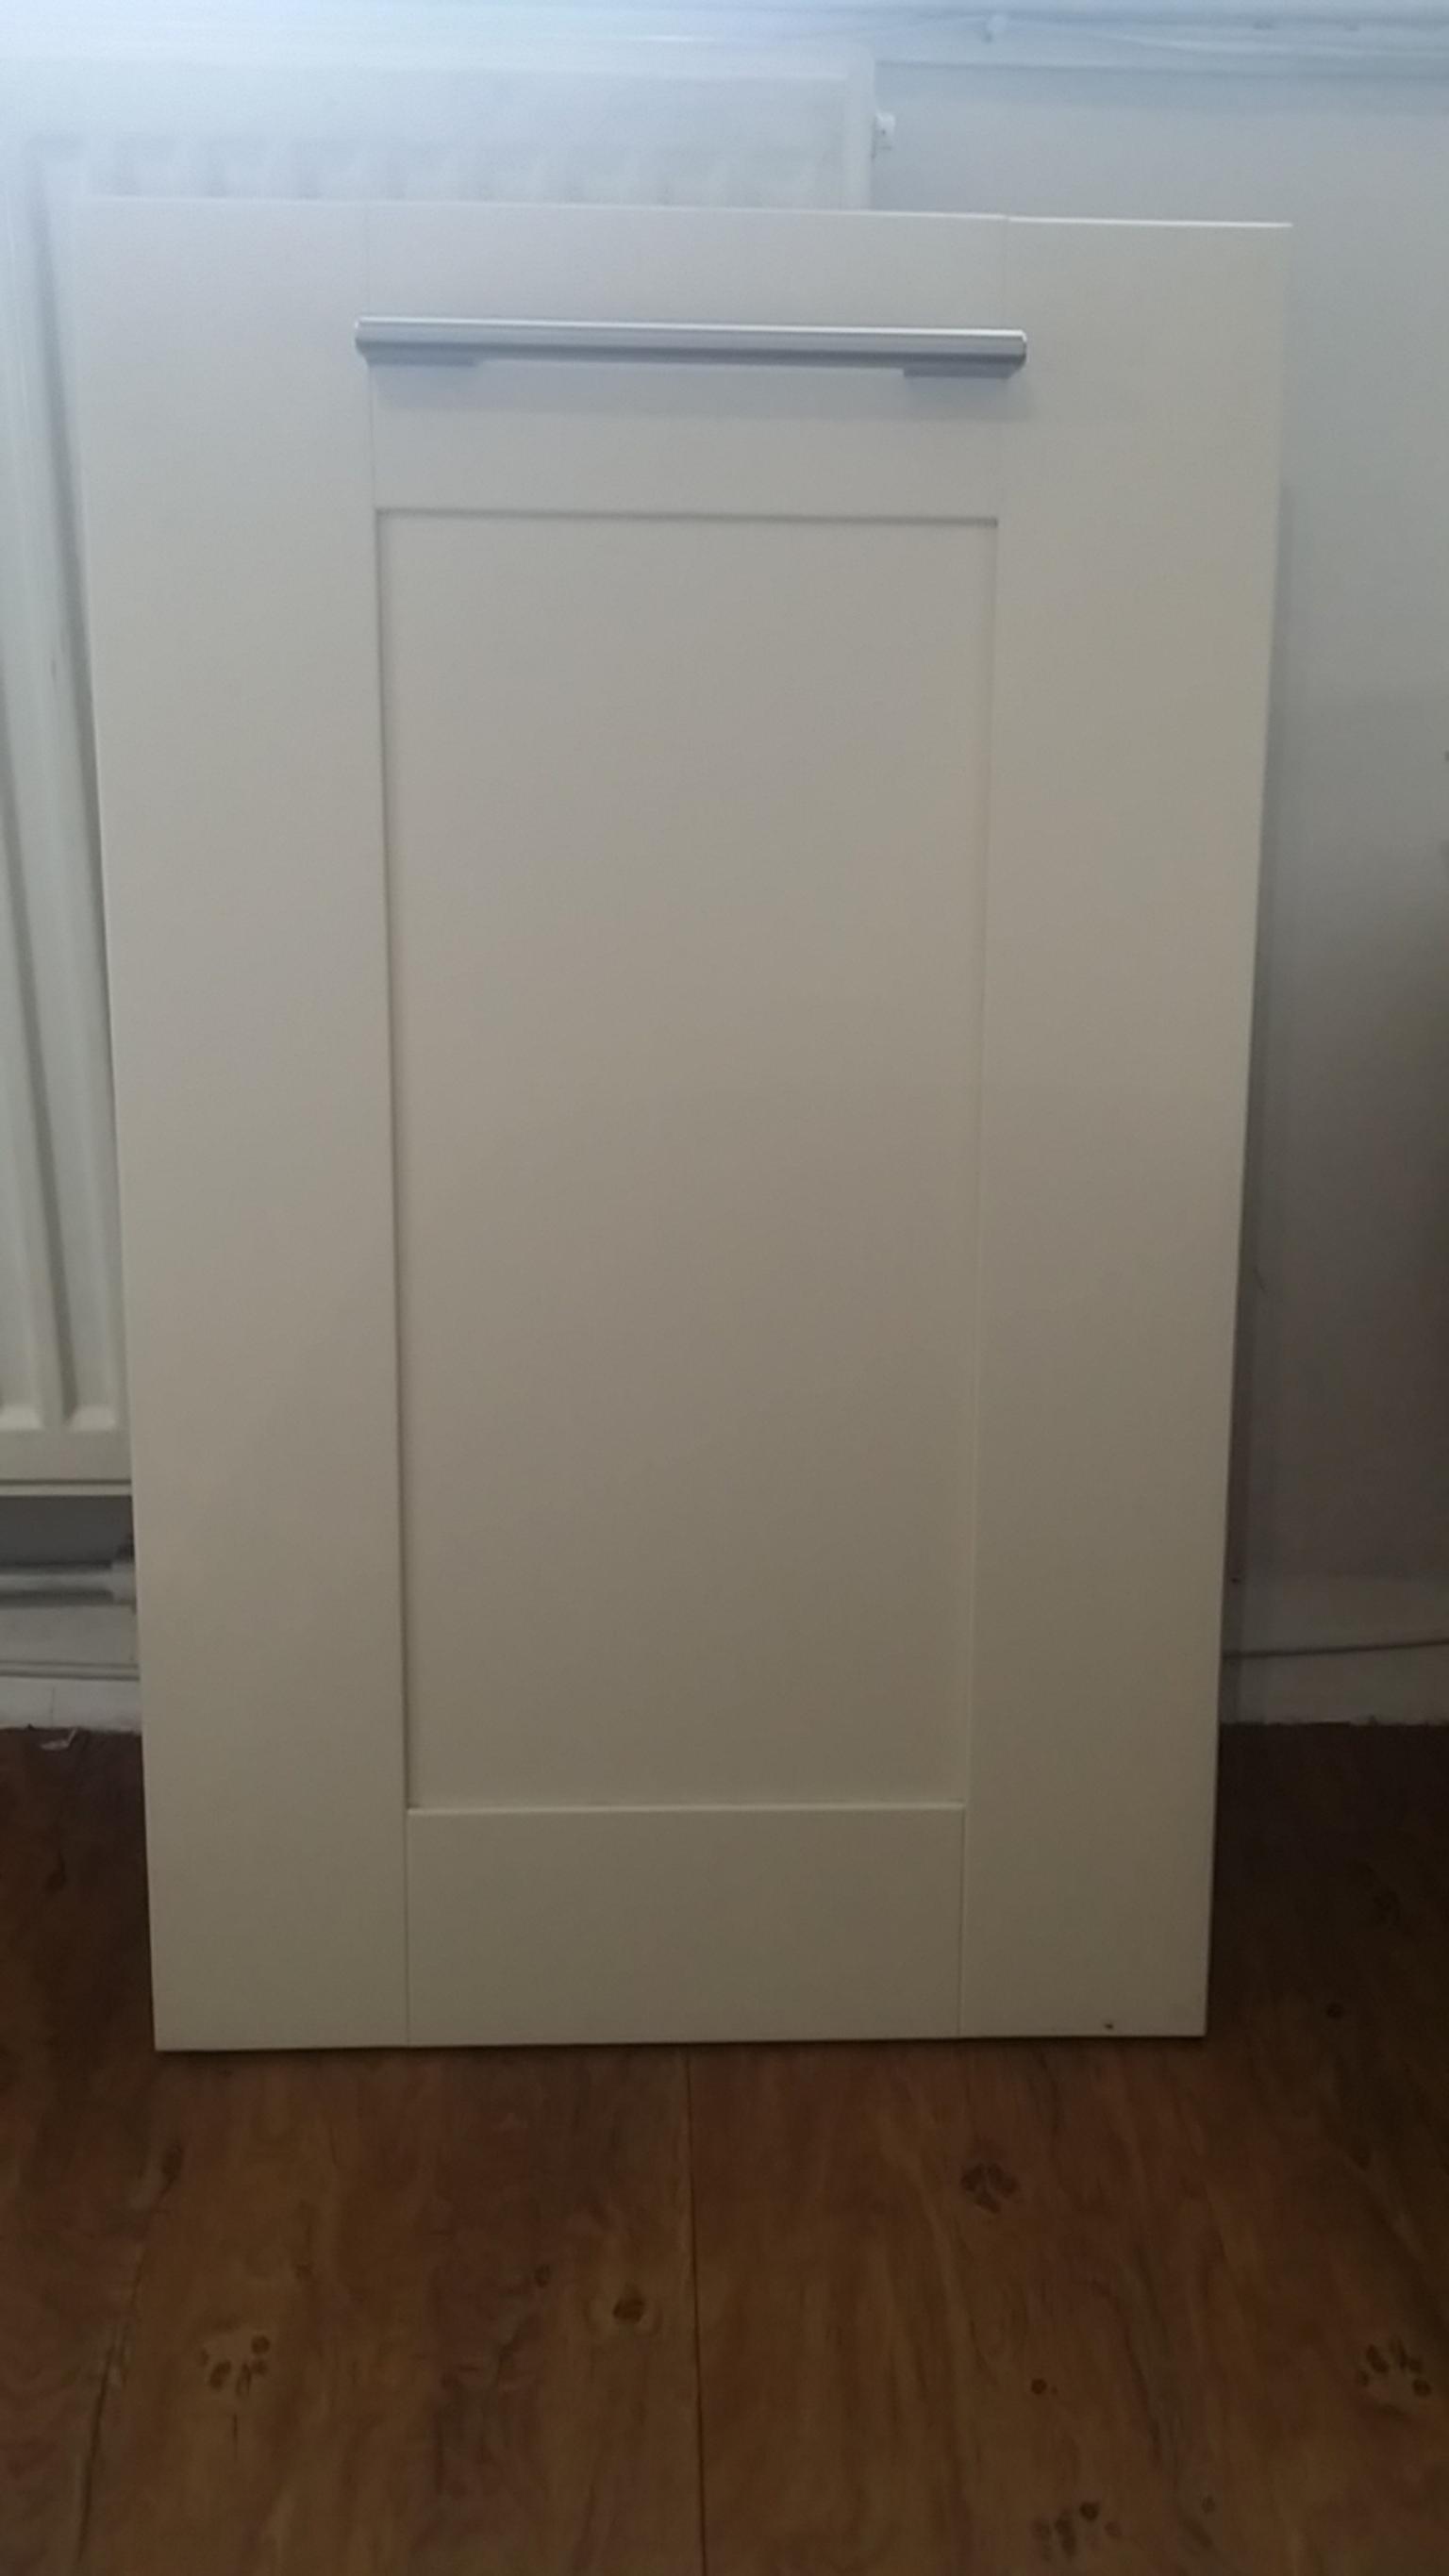 Wickes Tiverton Bone Kitchen Doors In Br6 London For 85 00 For Sale Shpock